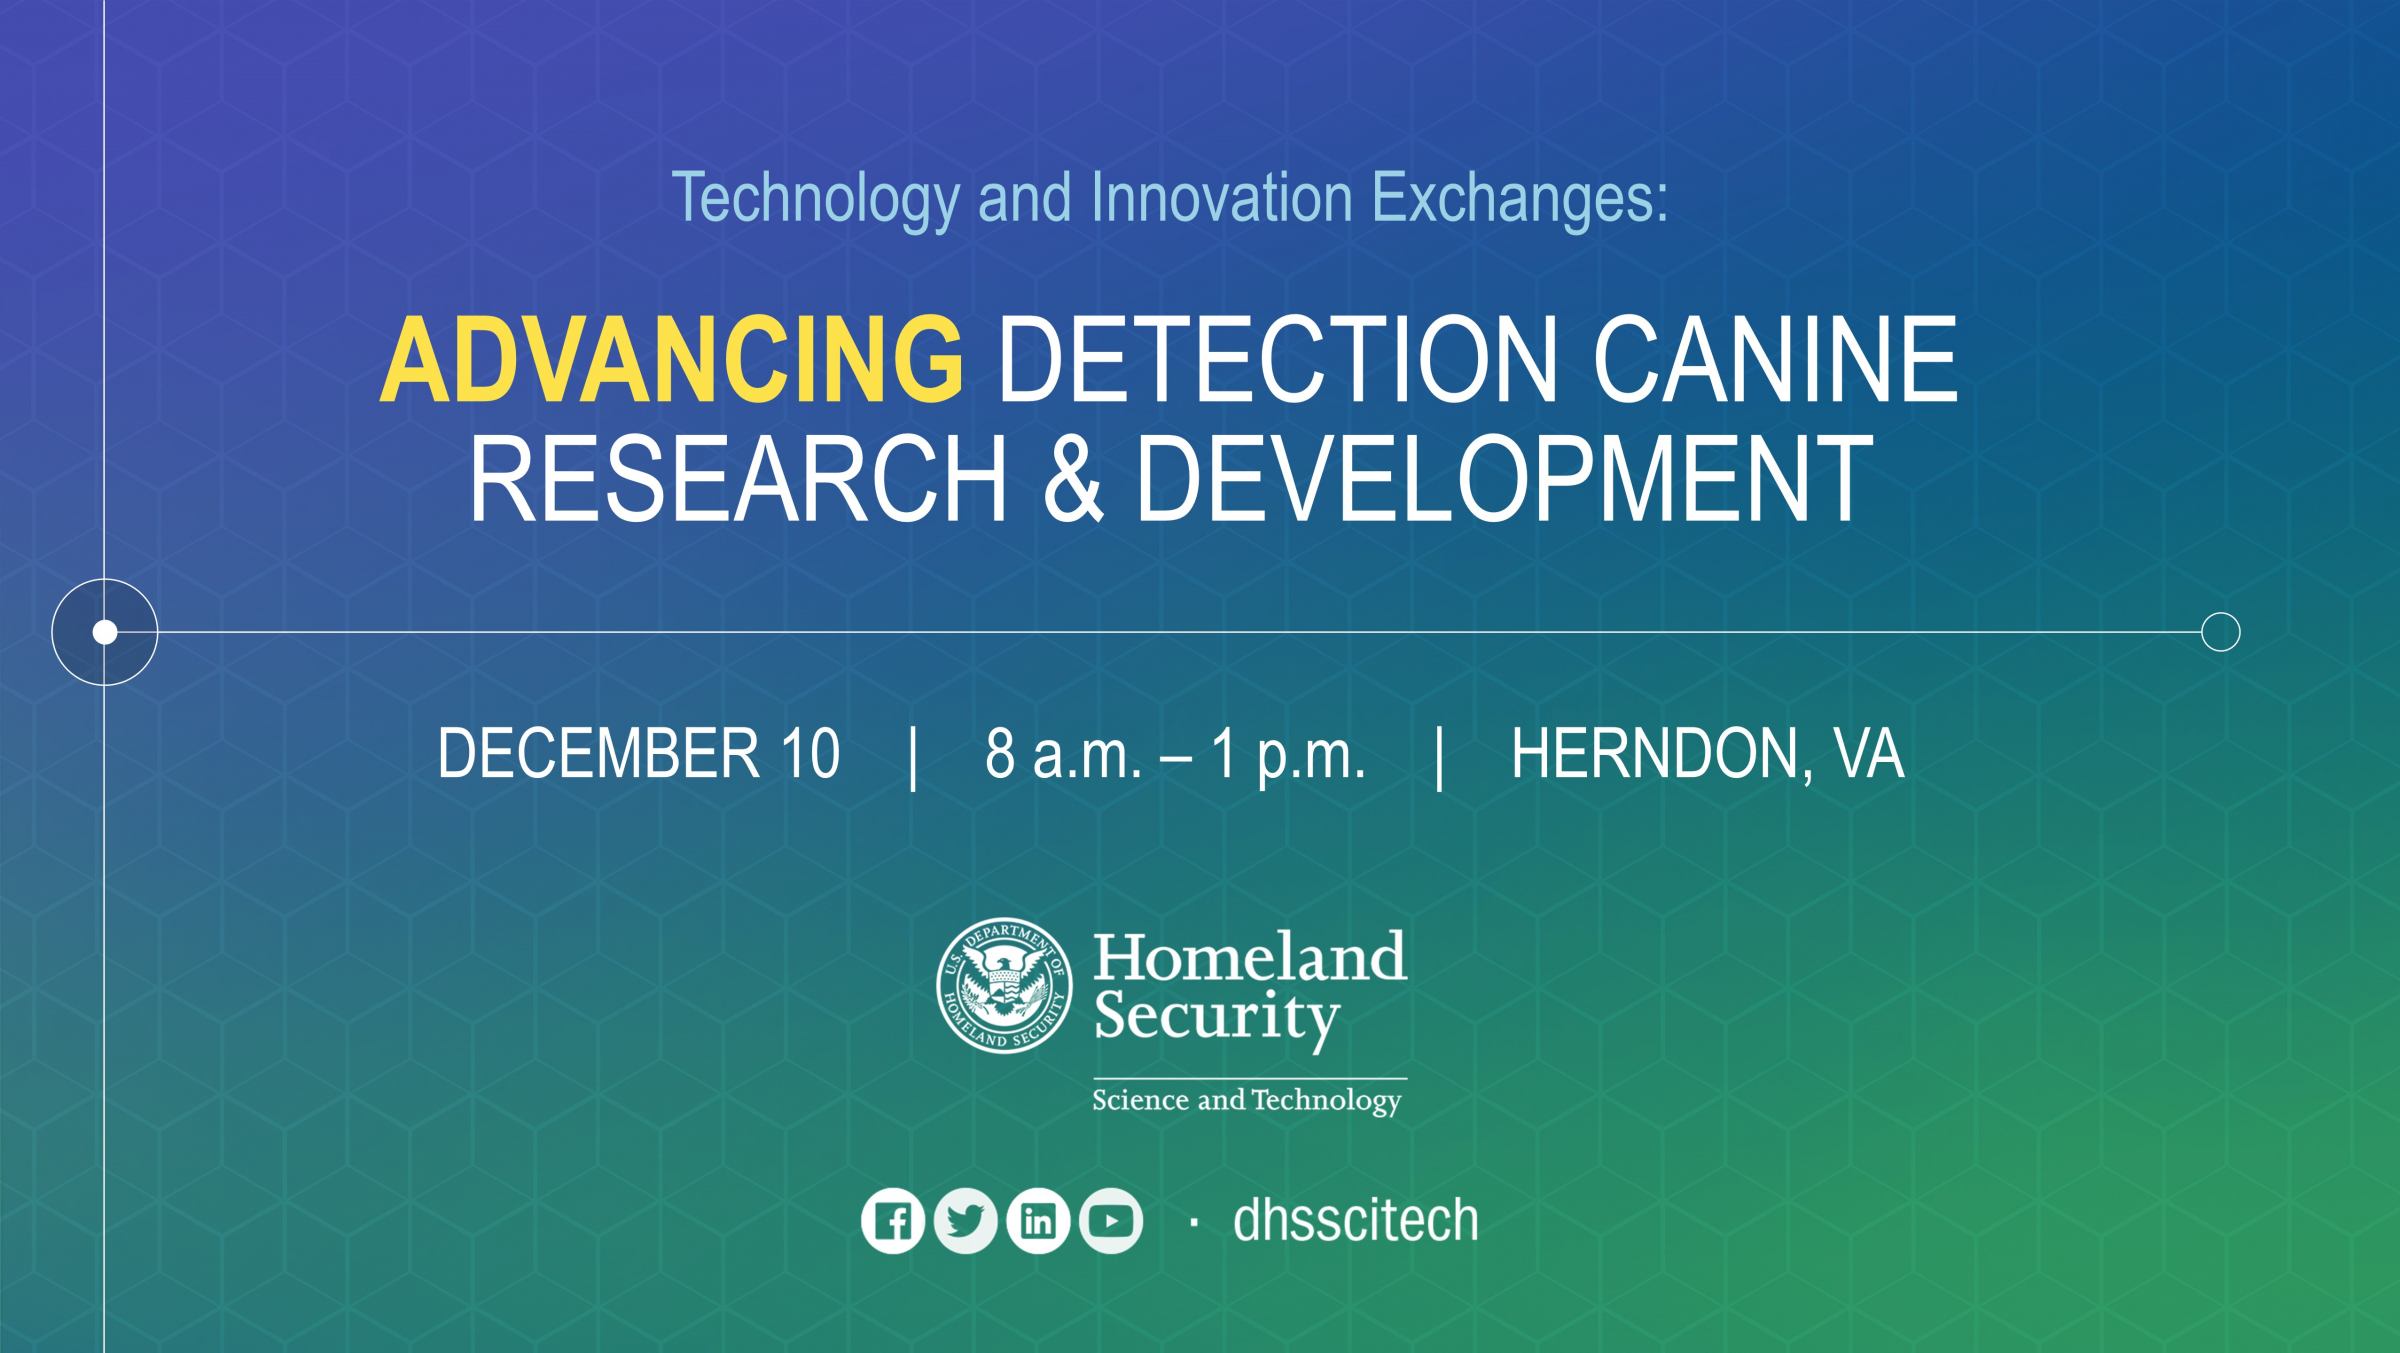 TIES: Technology and Innovation Exchanges Advancing Detection Canine Research and Development December 10, 2019 8:00am - 1:00pm Herndon, VA